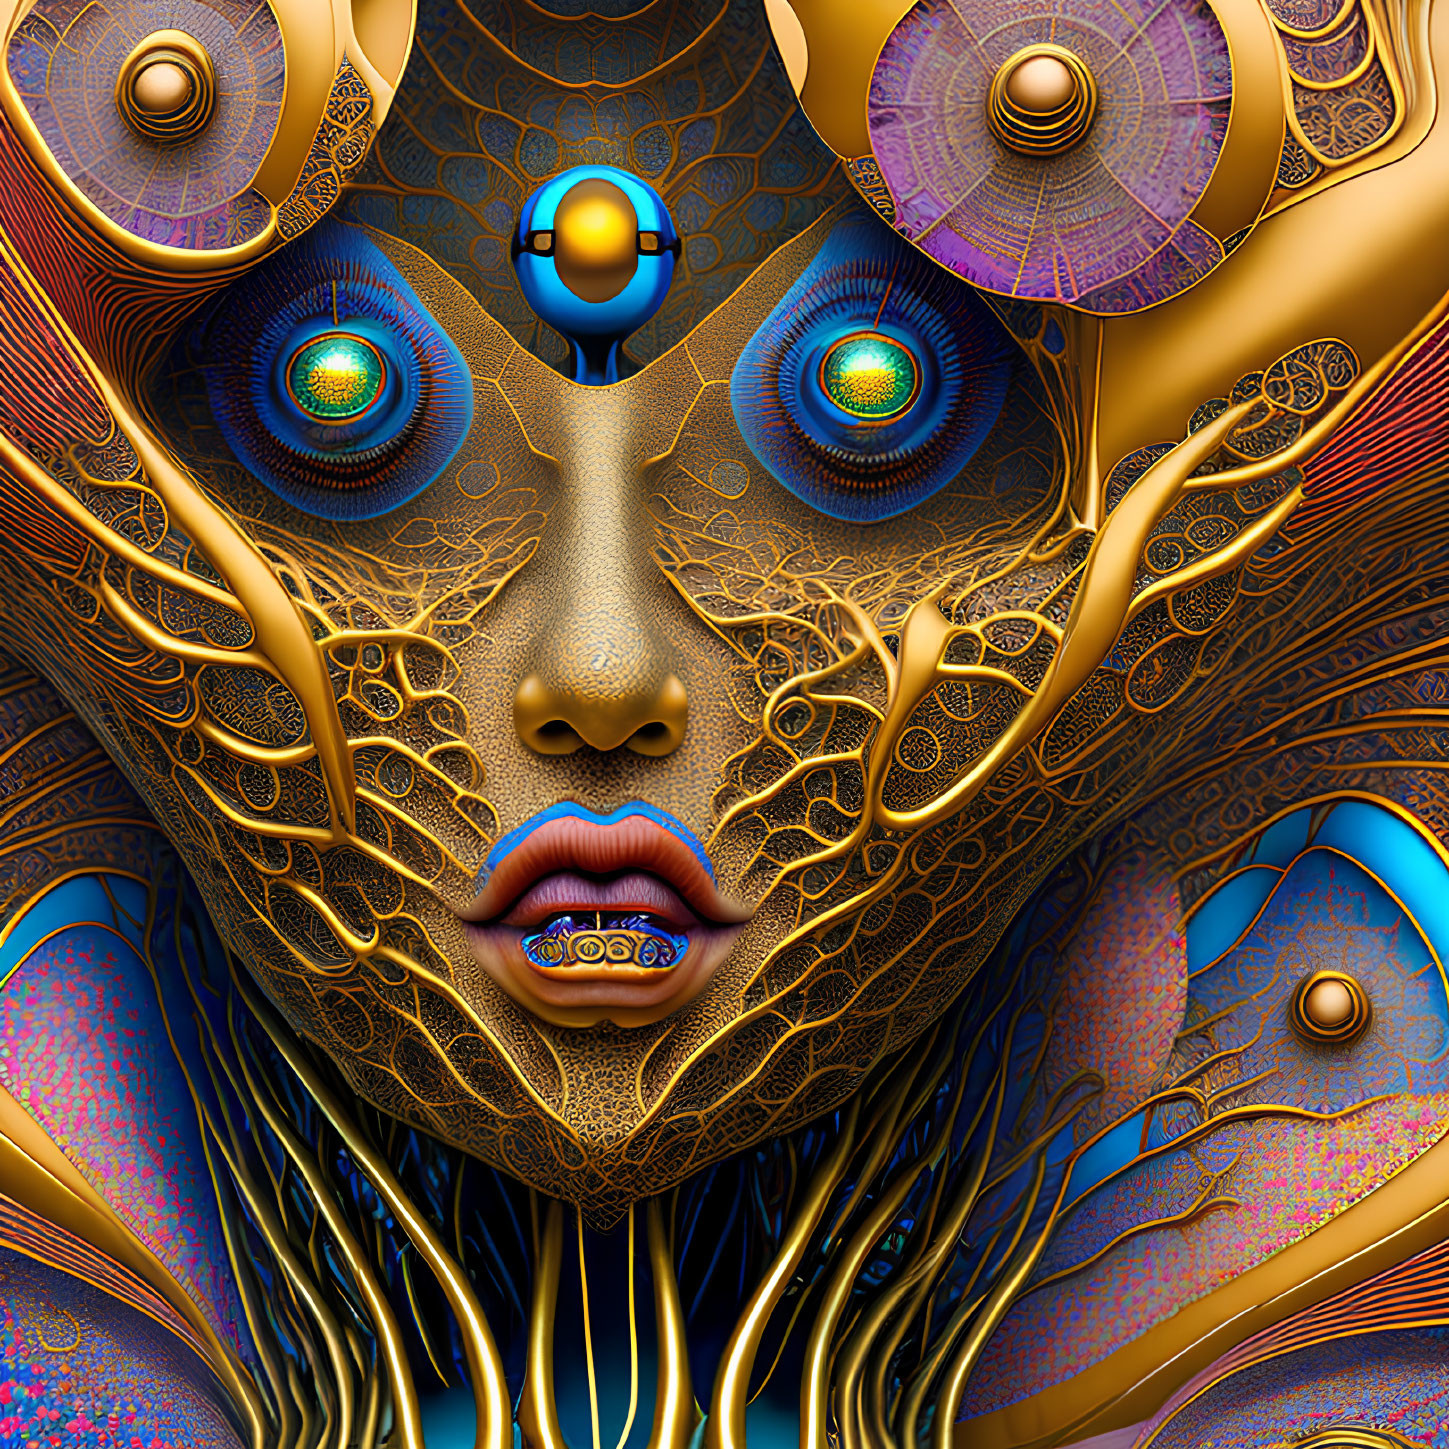 Colorful digital artwork: Face with multiple eyes and intricate patterns